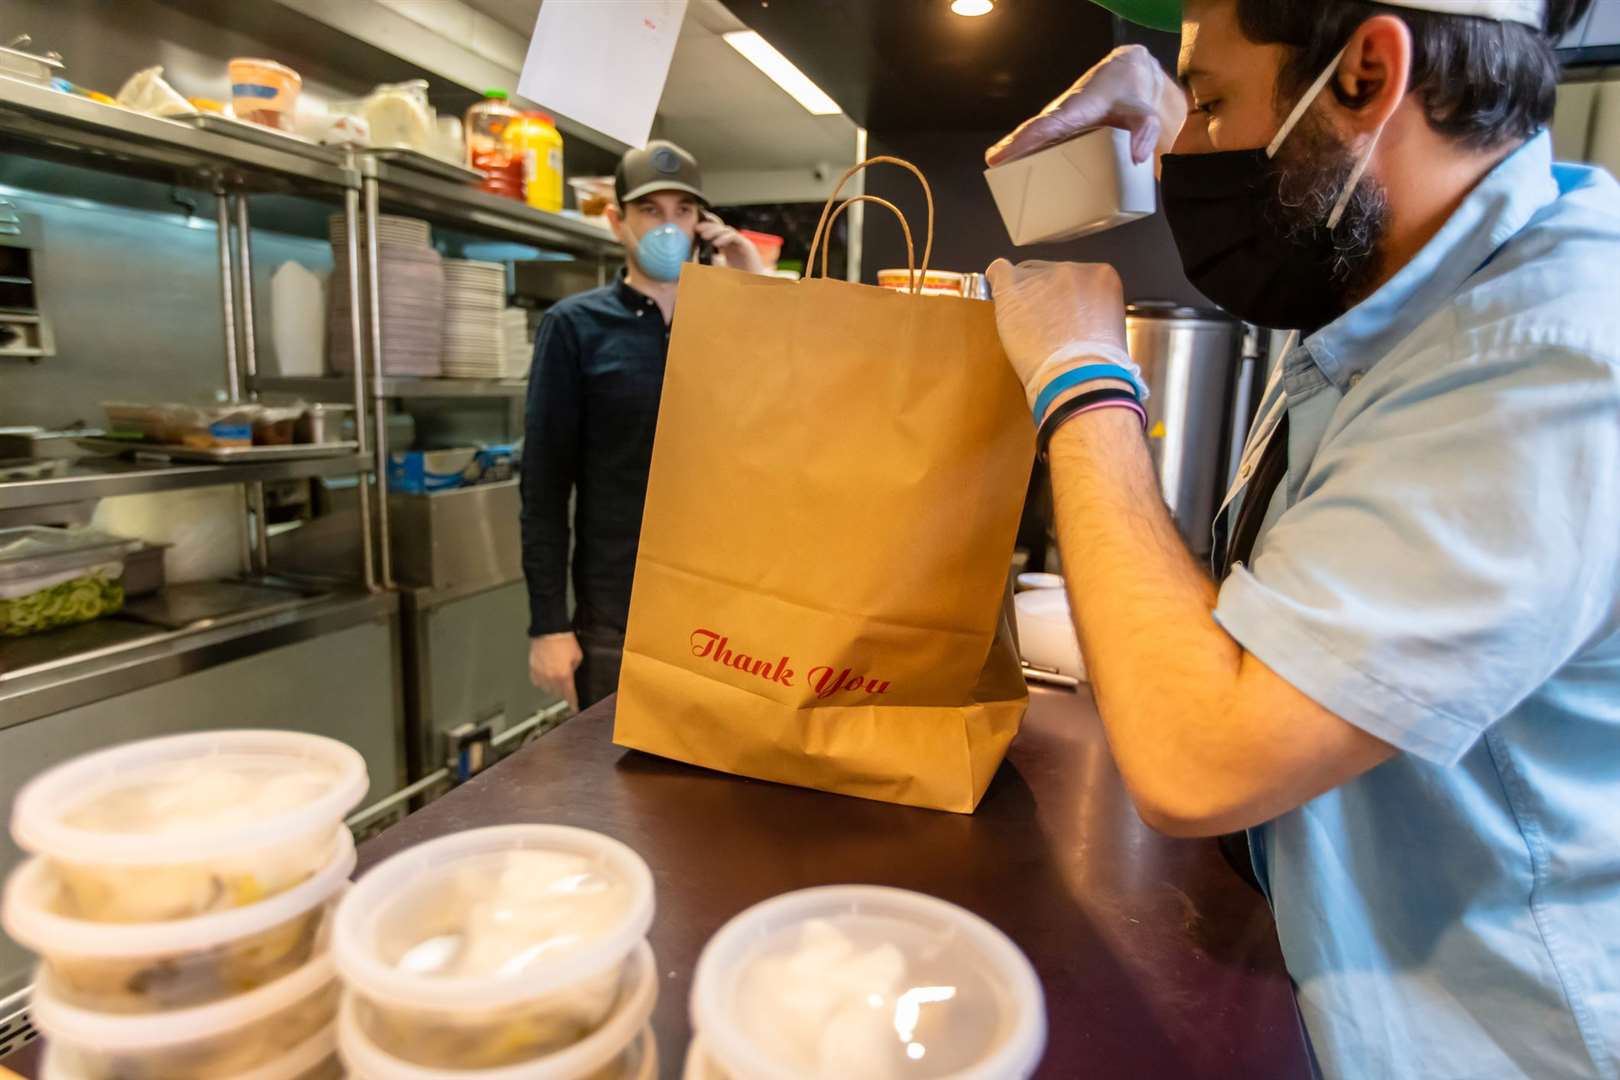 Strict conditions can be attached to new takeaways, says the government, to encourage them to help clean up. Photo: iStock.